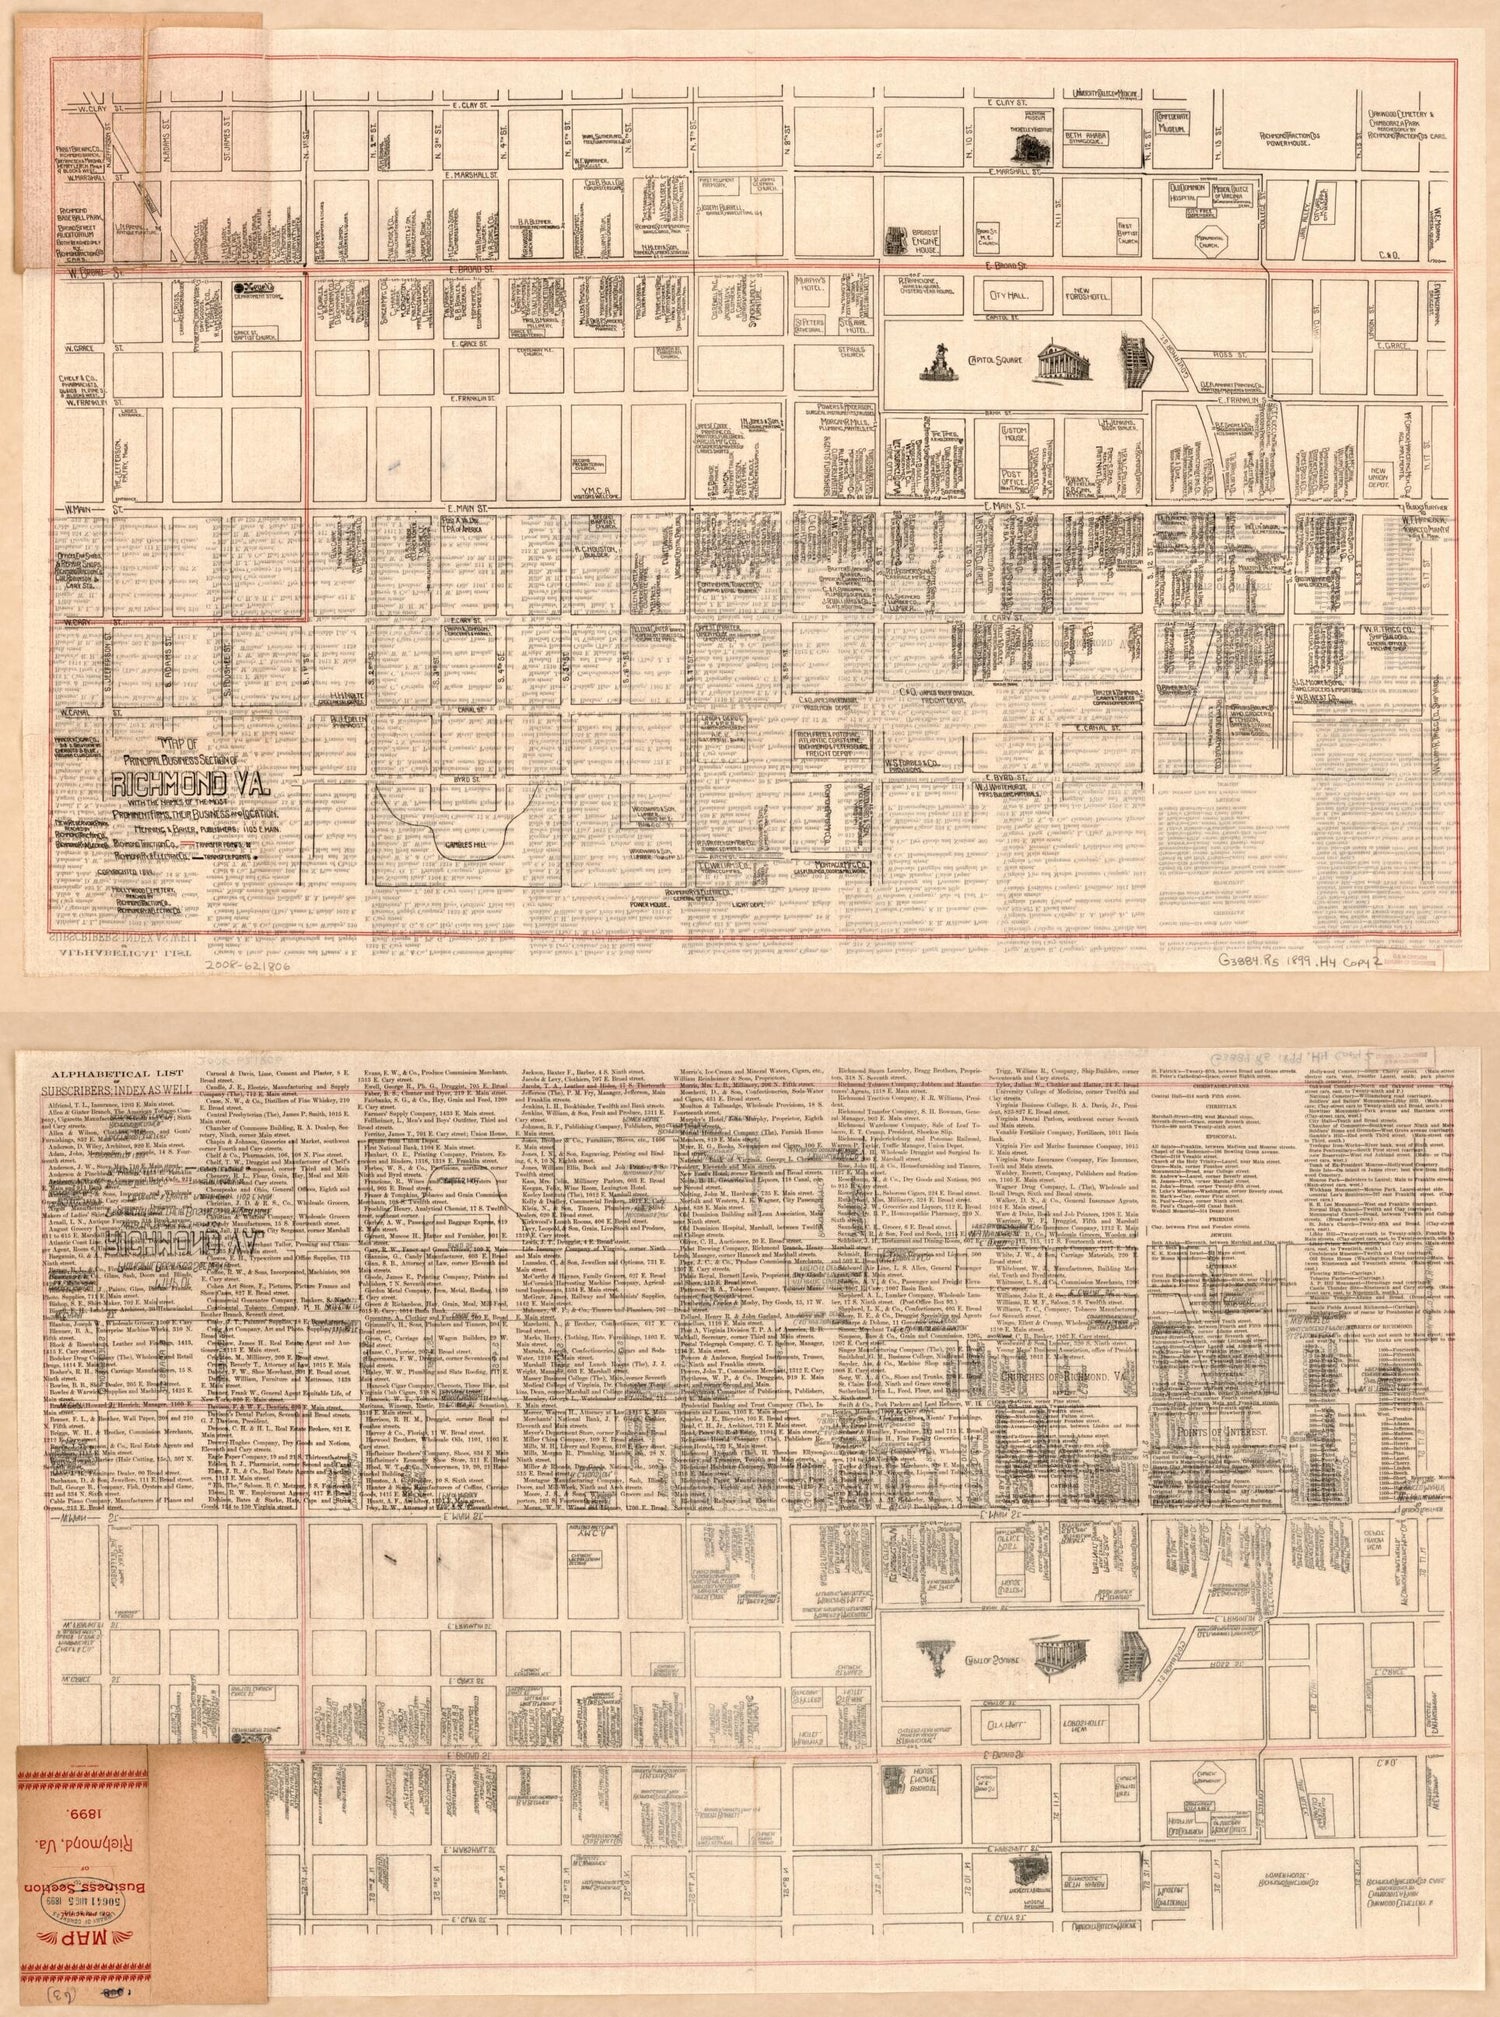 This old map of Map of Principal Business Section of Richmond, VA. : With the Names of the Most Prominent Firms, Their Business and Location from 1899 was created by  Henning &amp; Baker in 1899